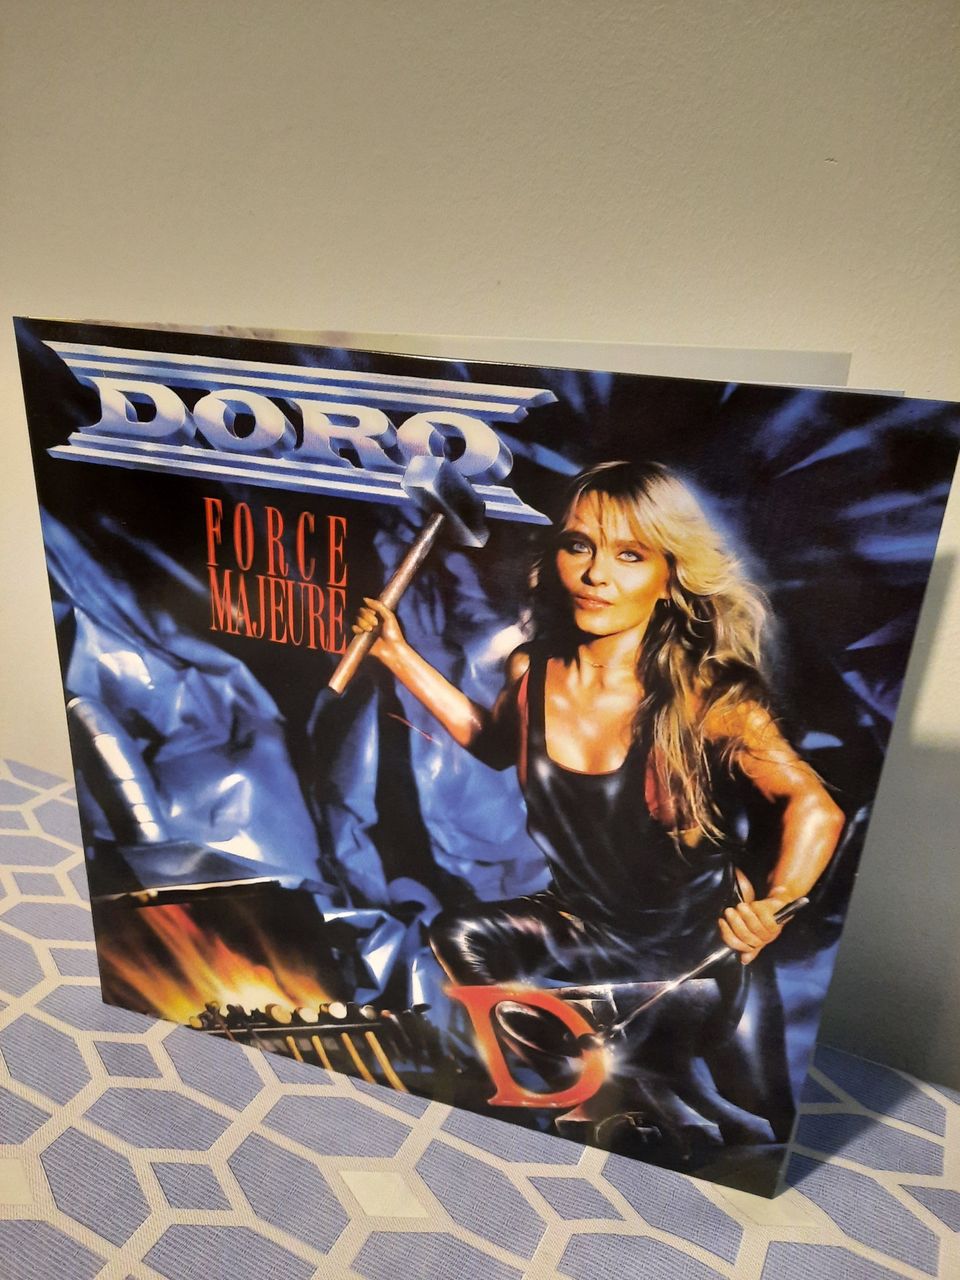 Doro: Force Majeure